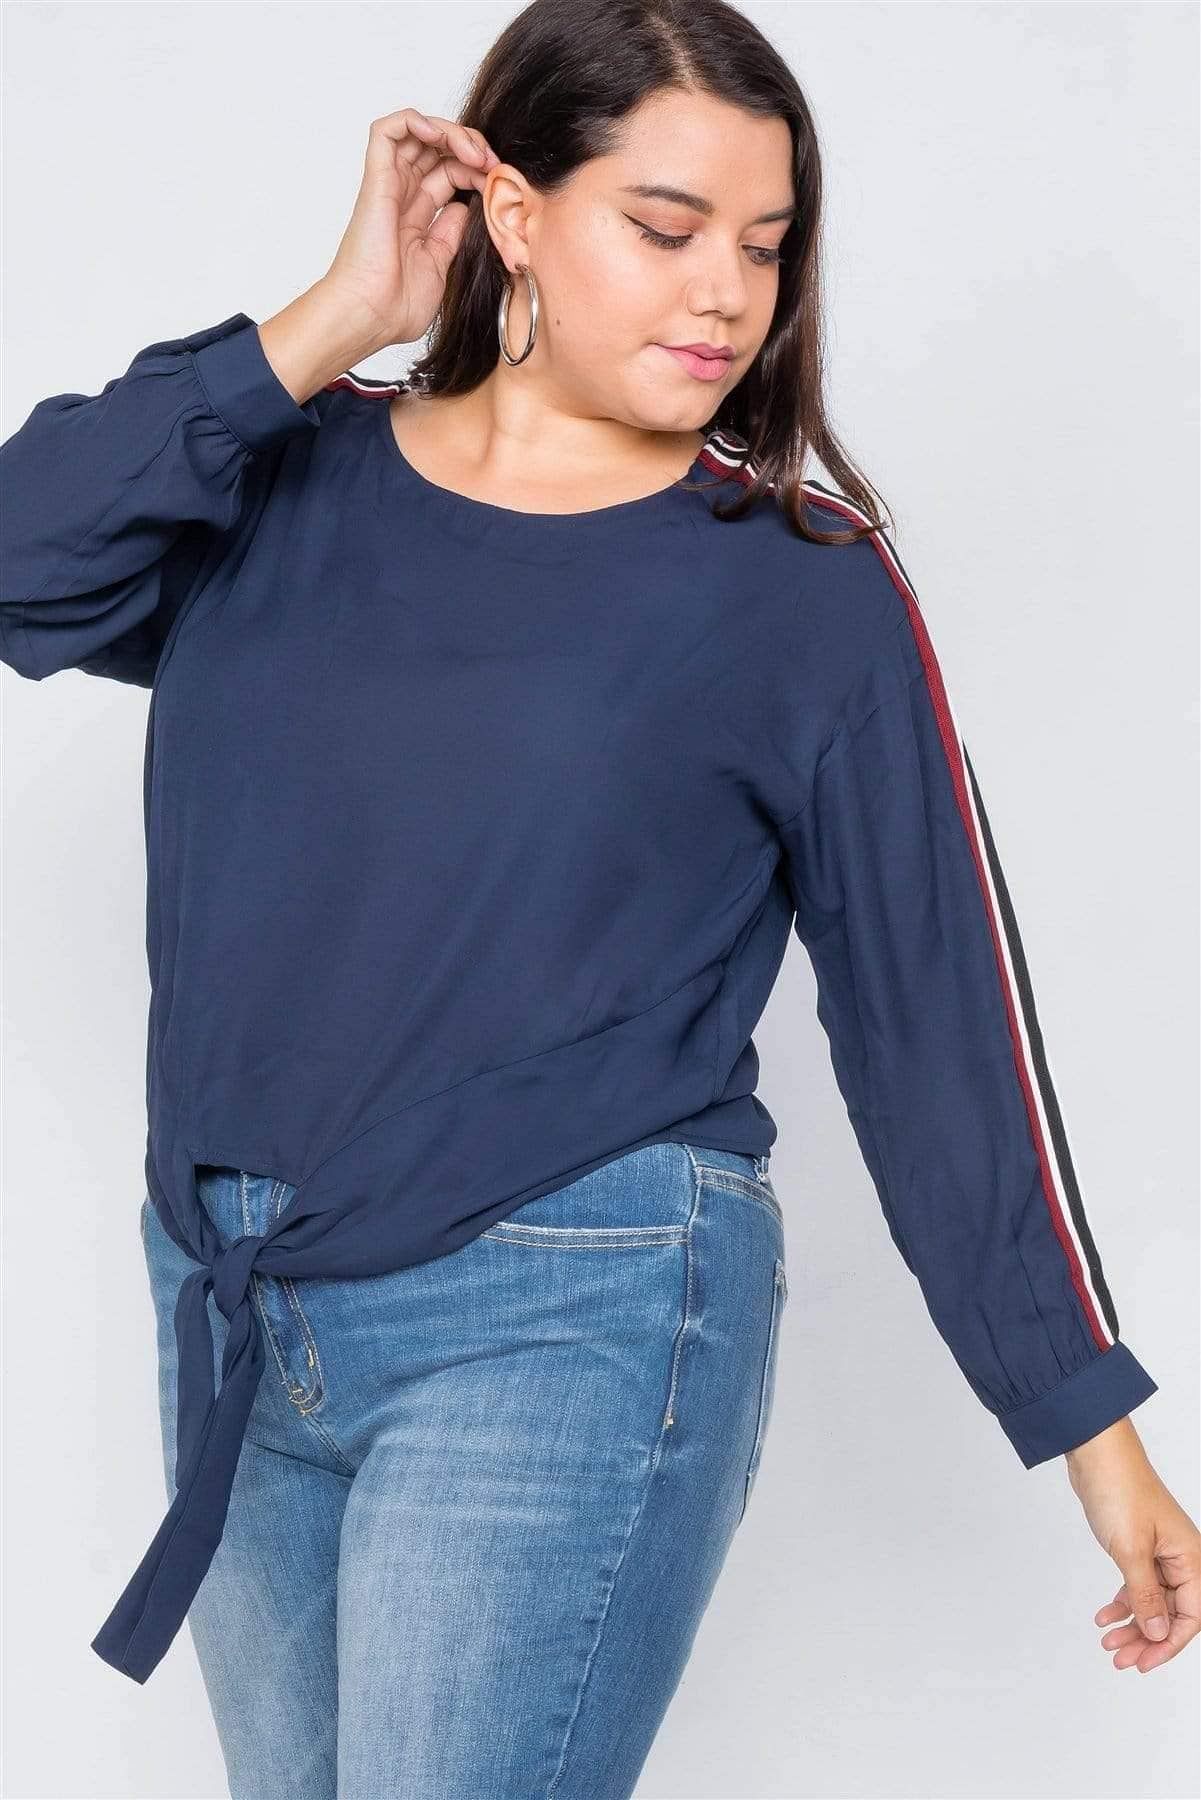 Navy Plus Size Long Sleeve Stripe Top - Shopping Therapy, LLC Top